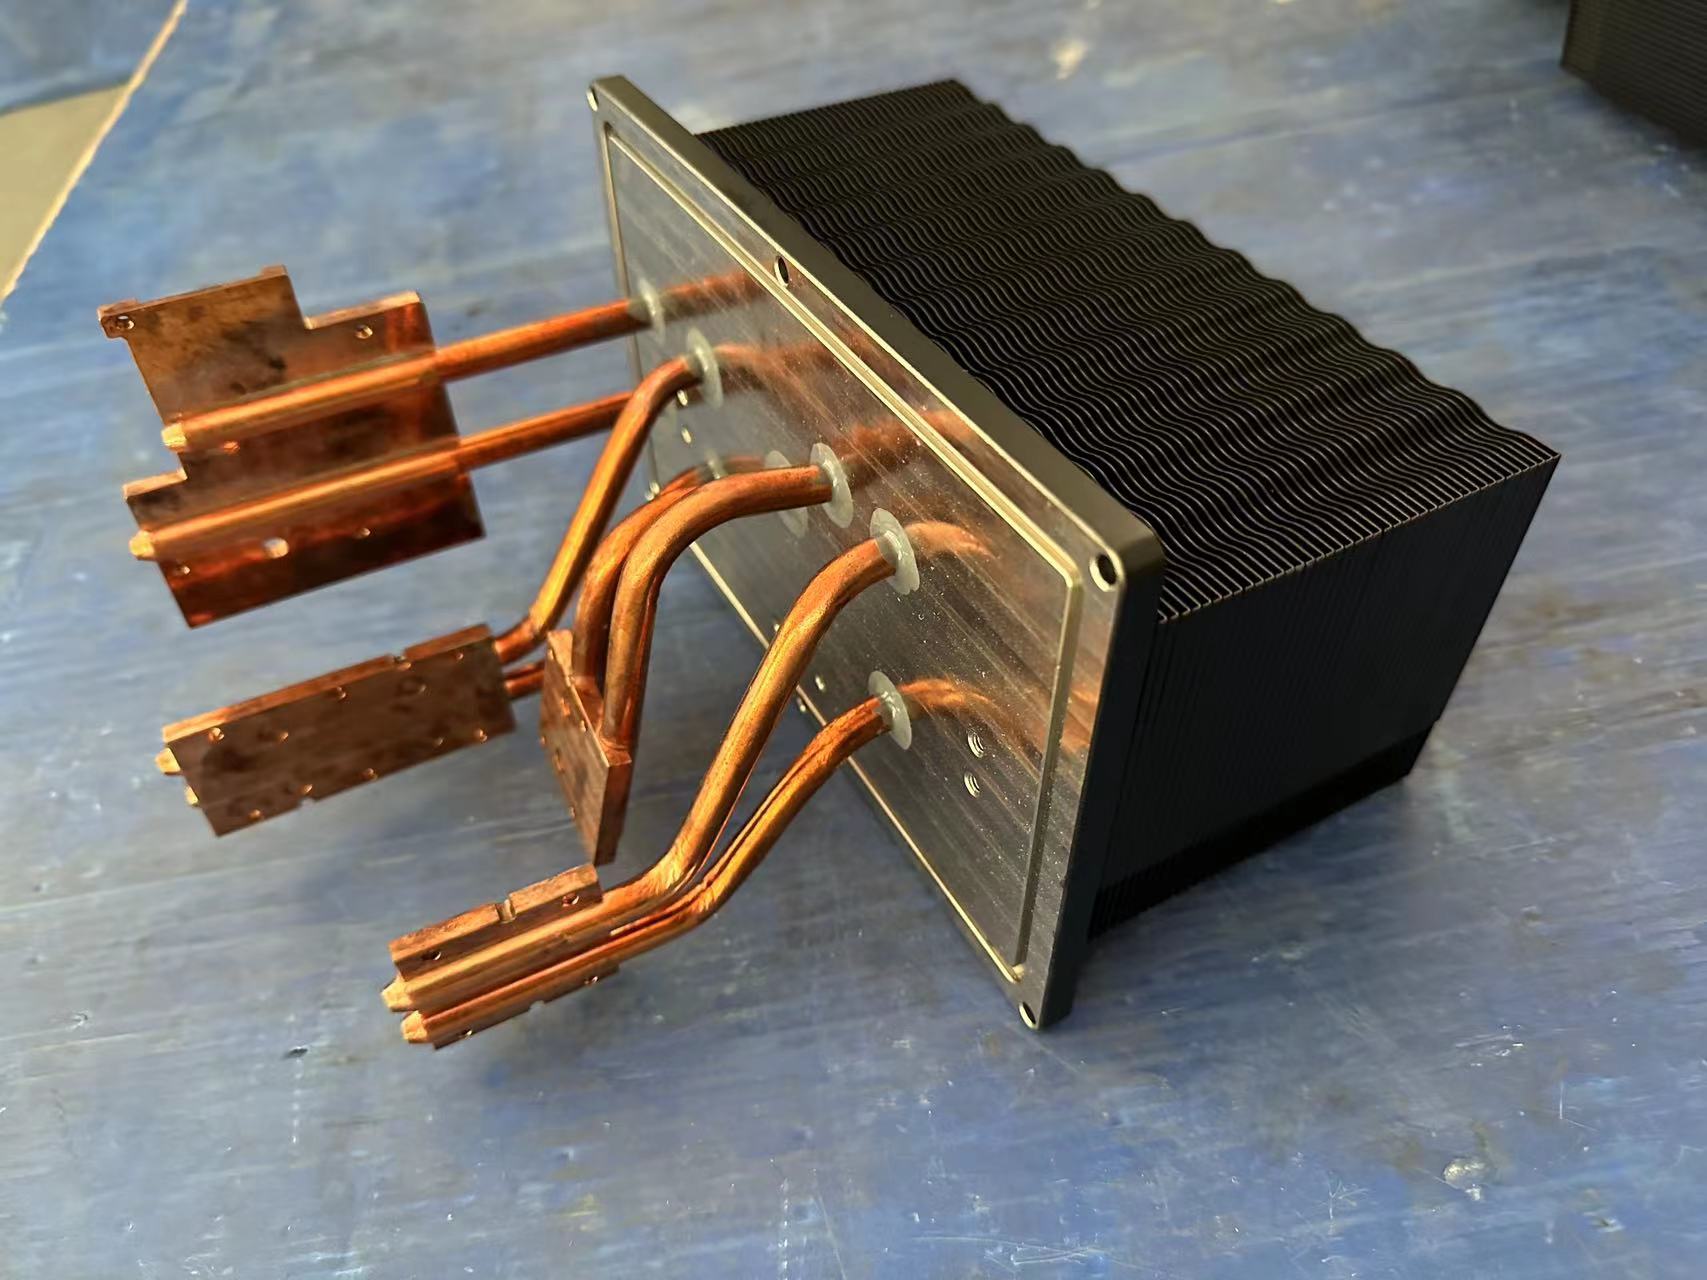 How Effective are Heat Pipe Heat Sinks in Dissipating High Thermal Loads in Electronic Devices?